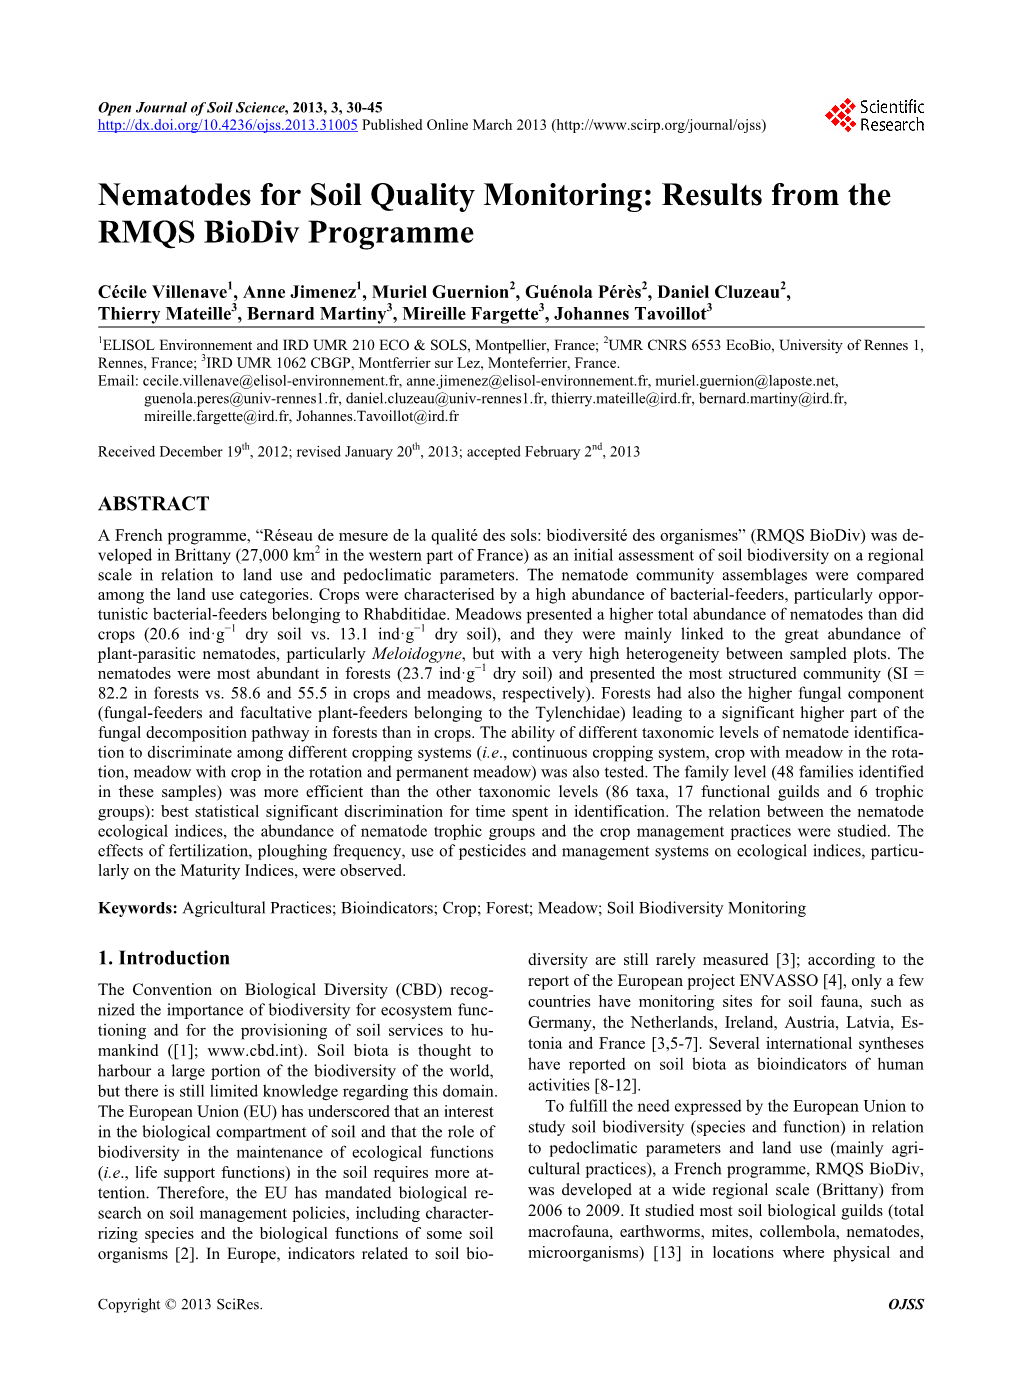 Nematodes for Soil Quality Monitoring: Results from the RMQS Biodiv Programme